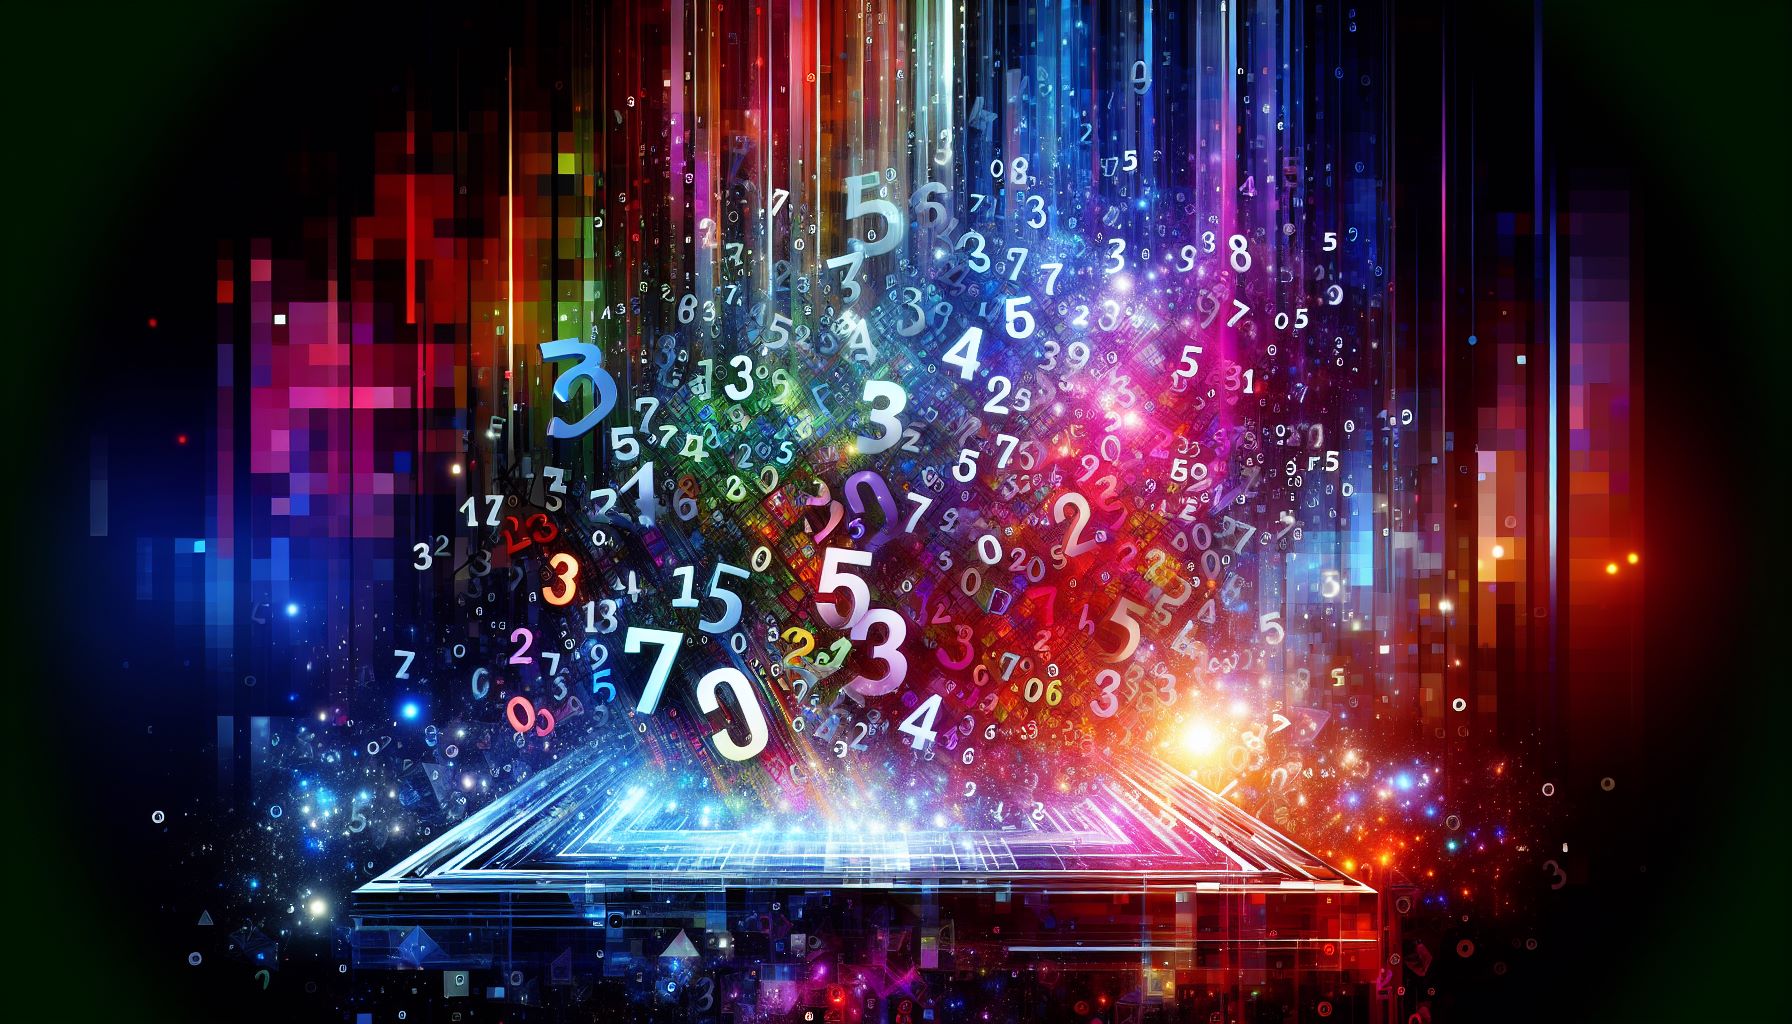 Colorful illustration of random numbers being generated